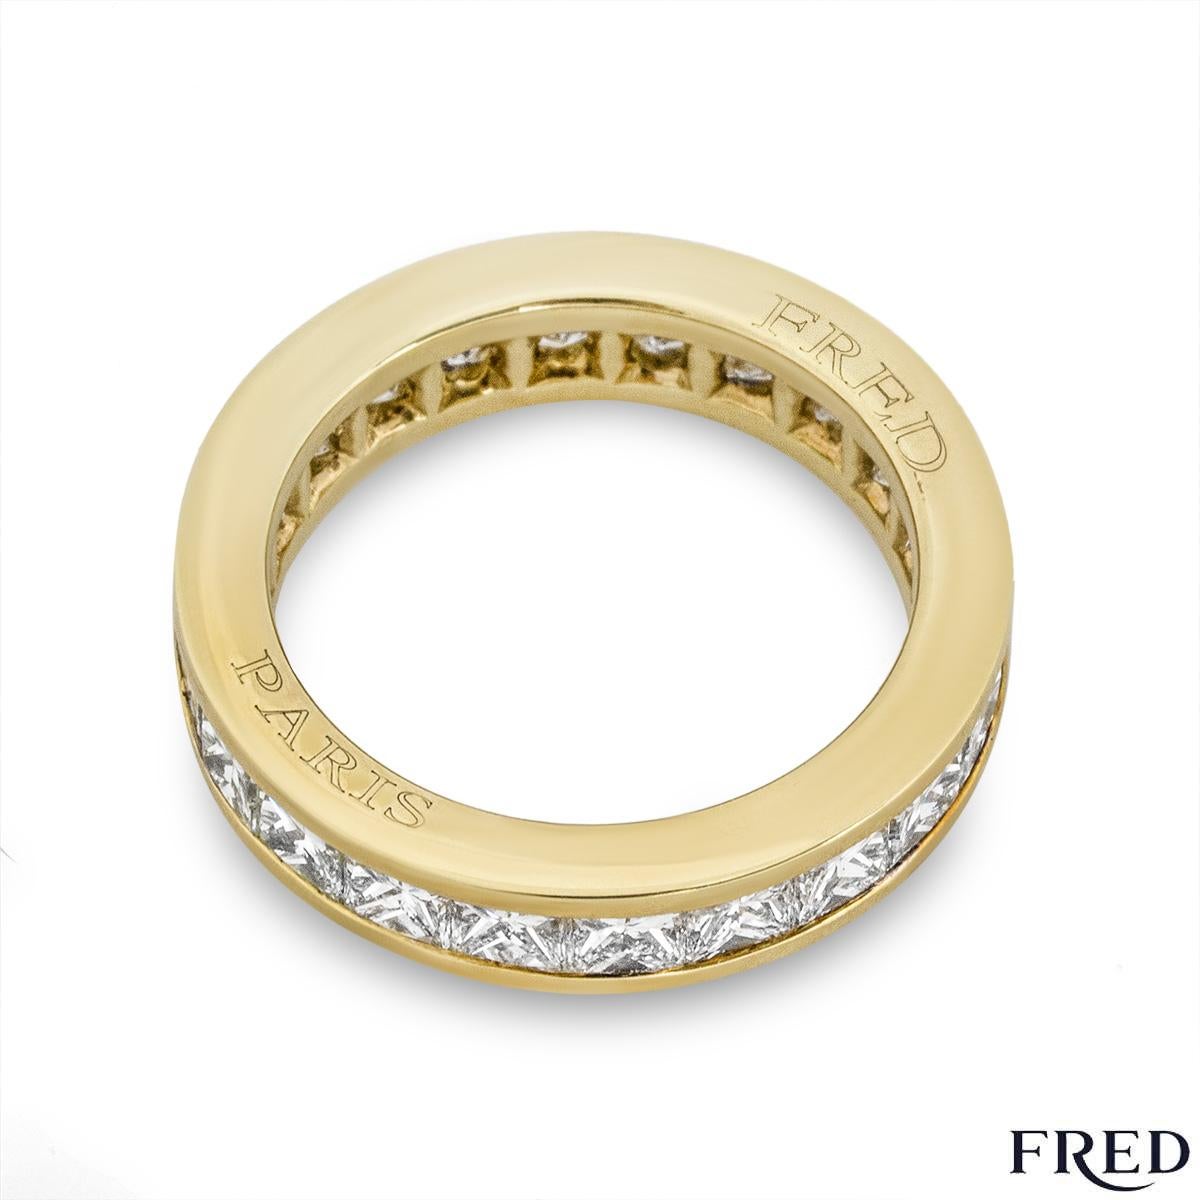 Fred Yellow Gold Diamond Eternity Ring In Excellent Condition For Sale In London, GB